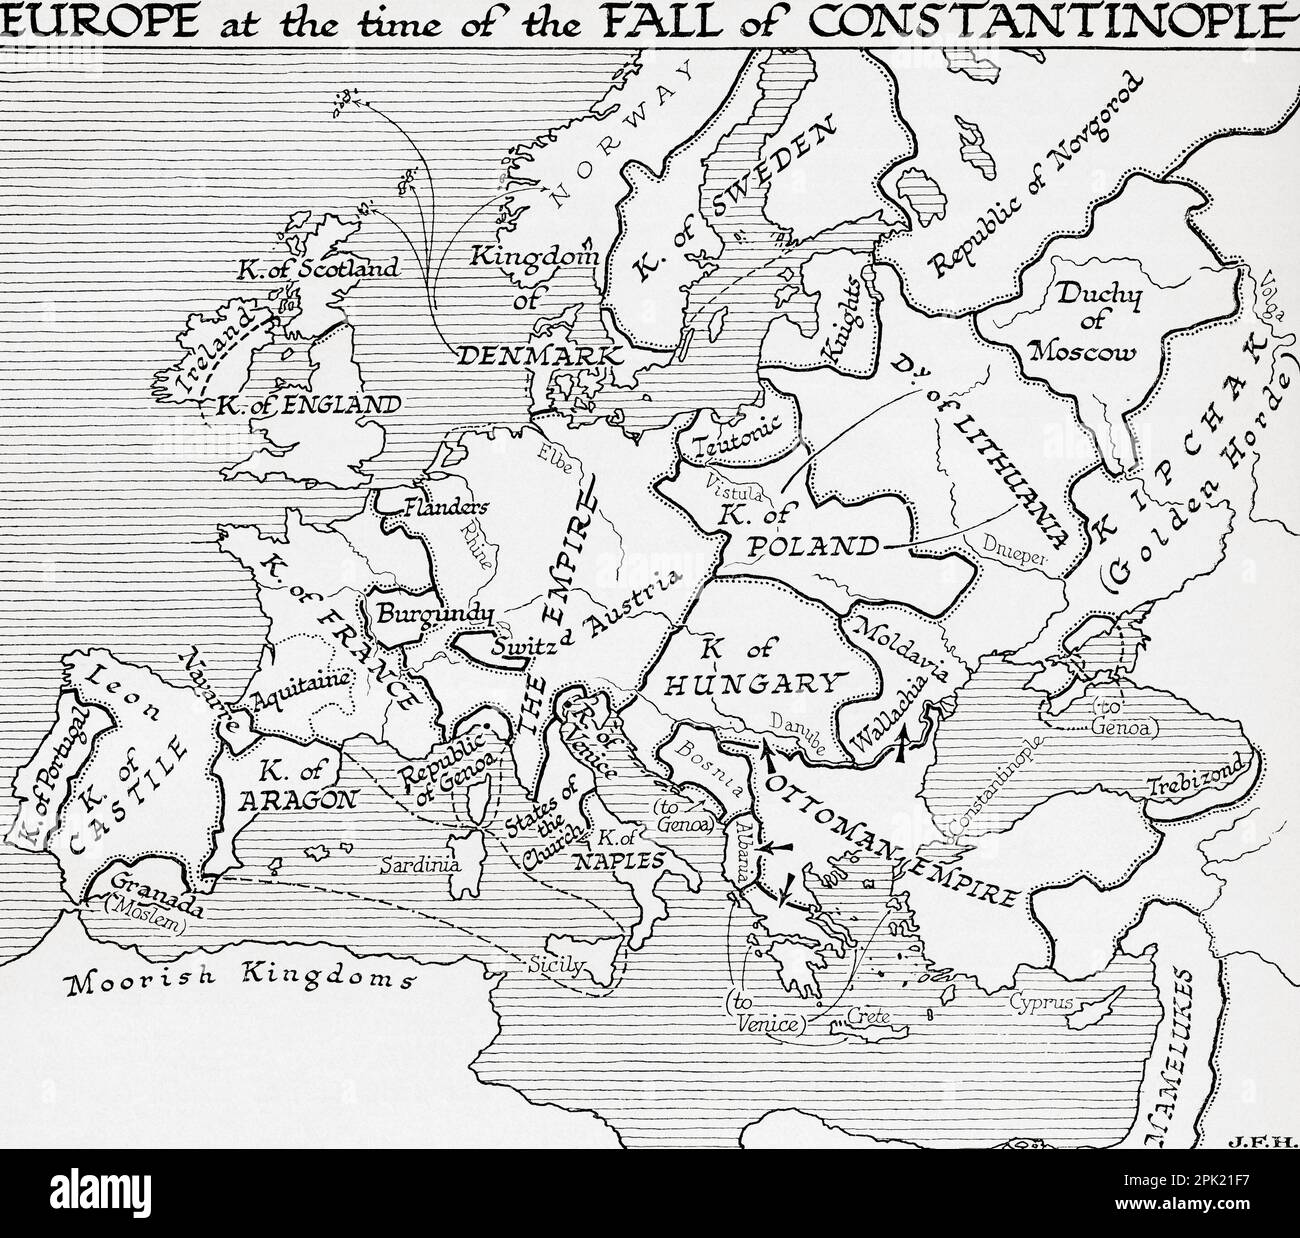 Map of Europe at the time of the Fall of Constantinople, 15th century.  From the book Outline of History by H.G. Wells, published 1920. Stock Photo